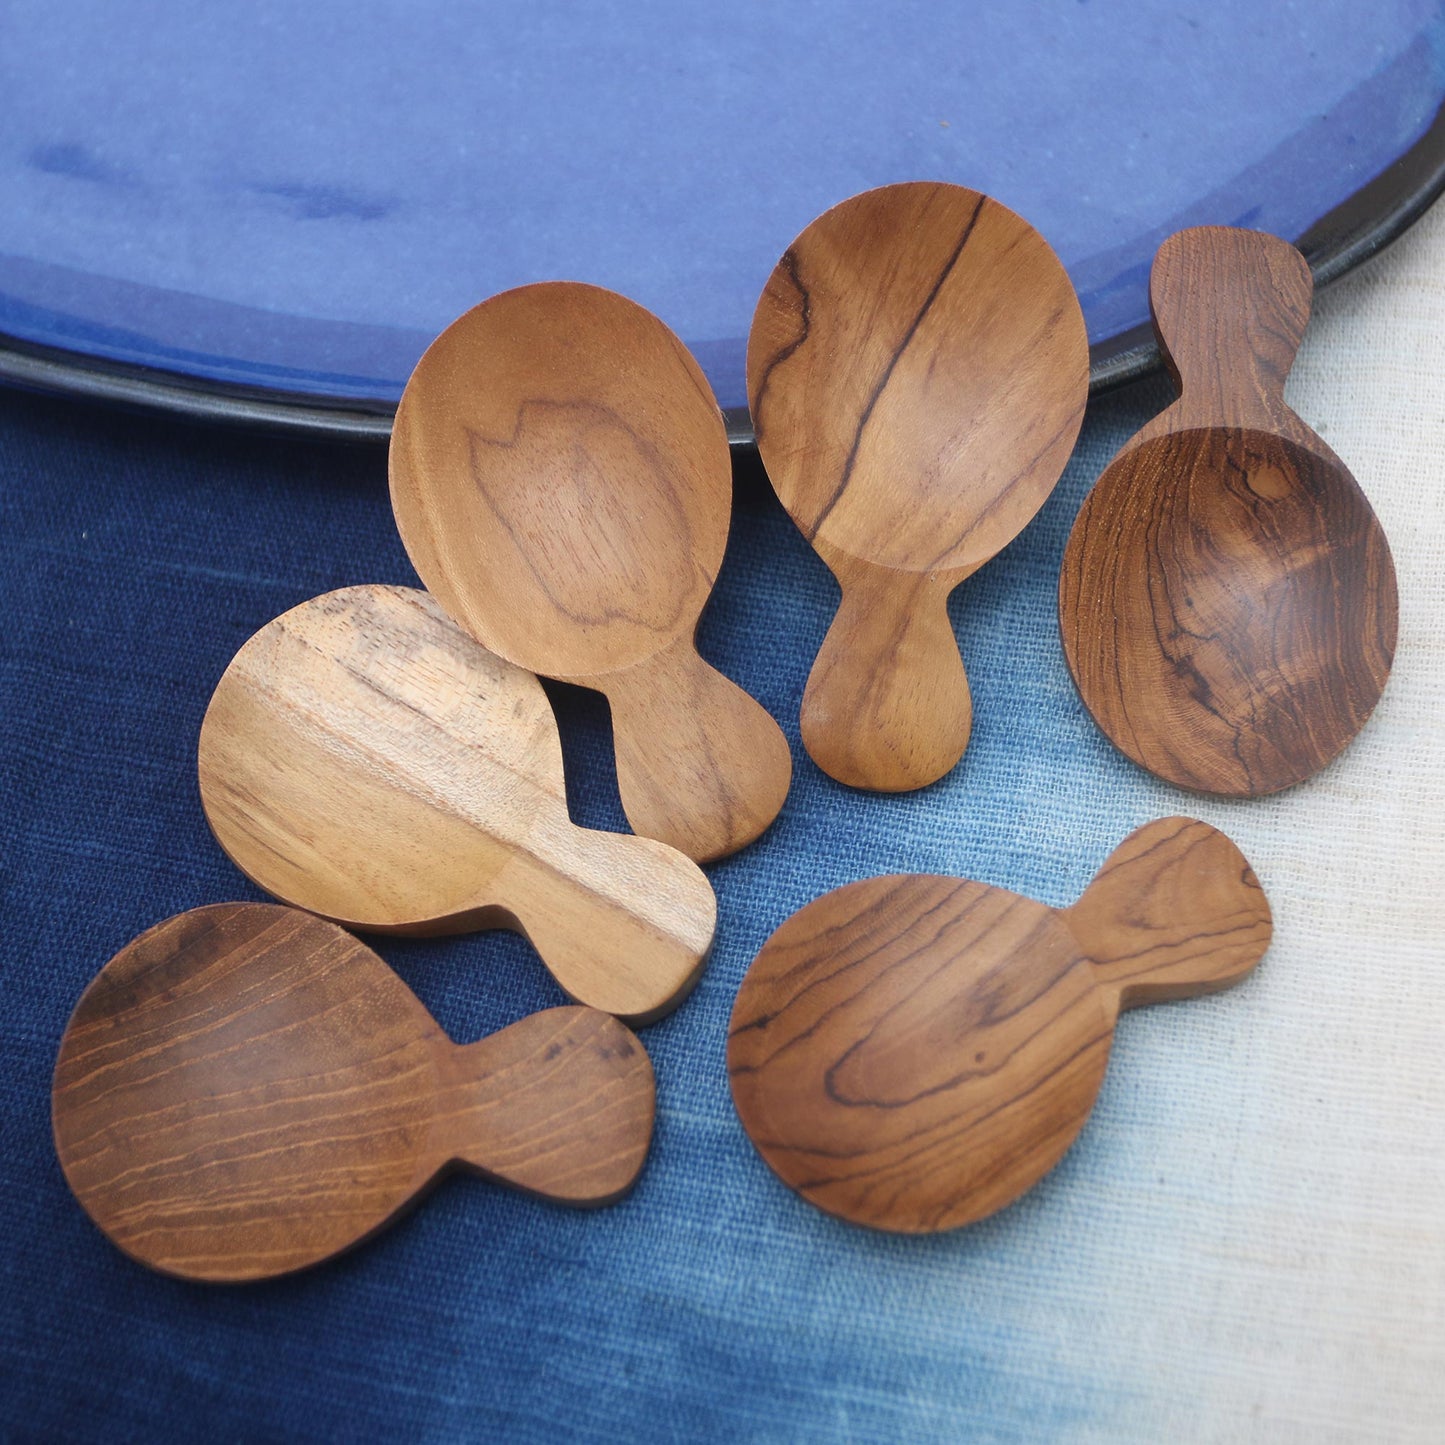 Time with Friends Handmade Sawo Wood Sugar Spoons from Bali (Set of 6)